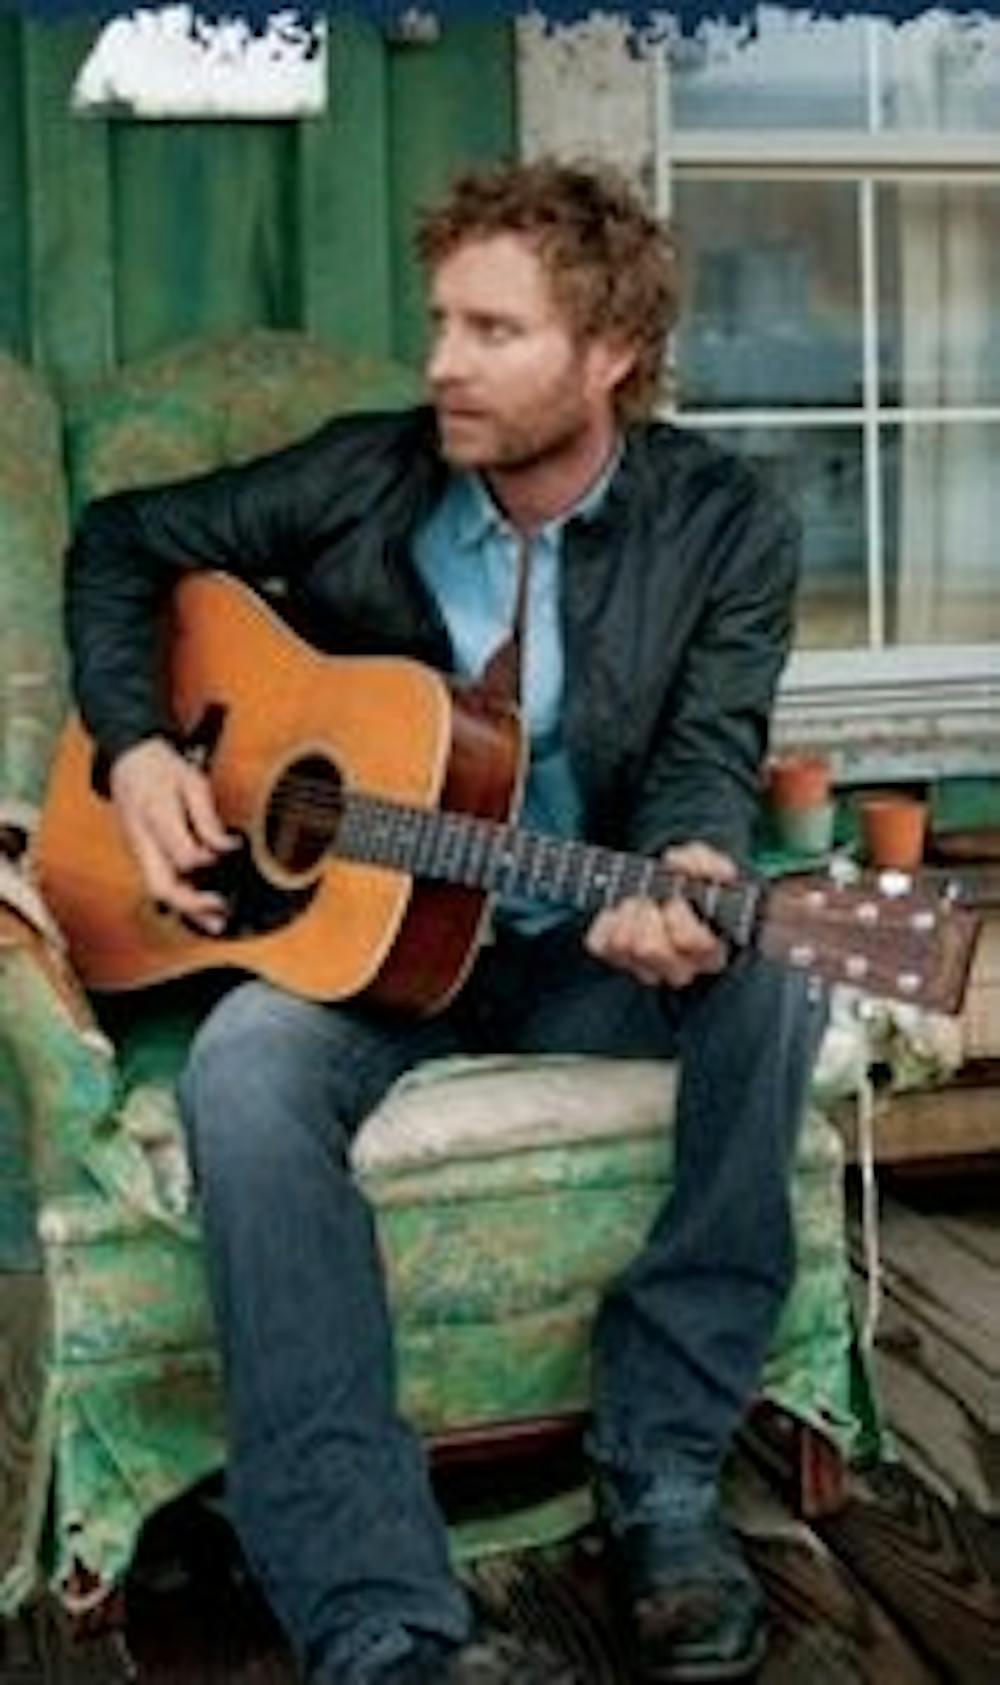 Dierks Bentley is one of three performers appearing at the Hudson Family Foundation benefit concert. (Courtesy of Brent Hall)